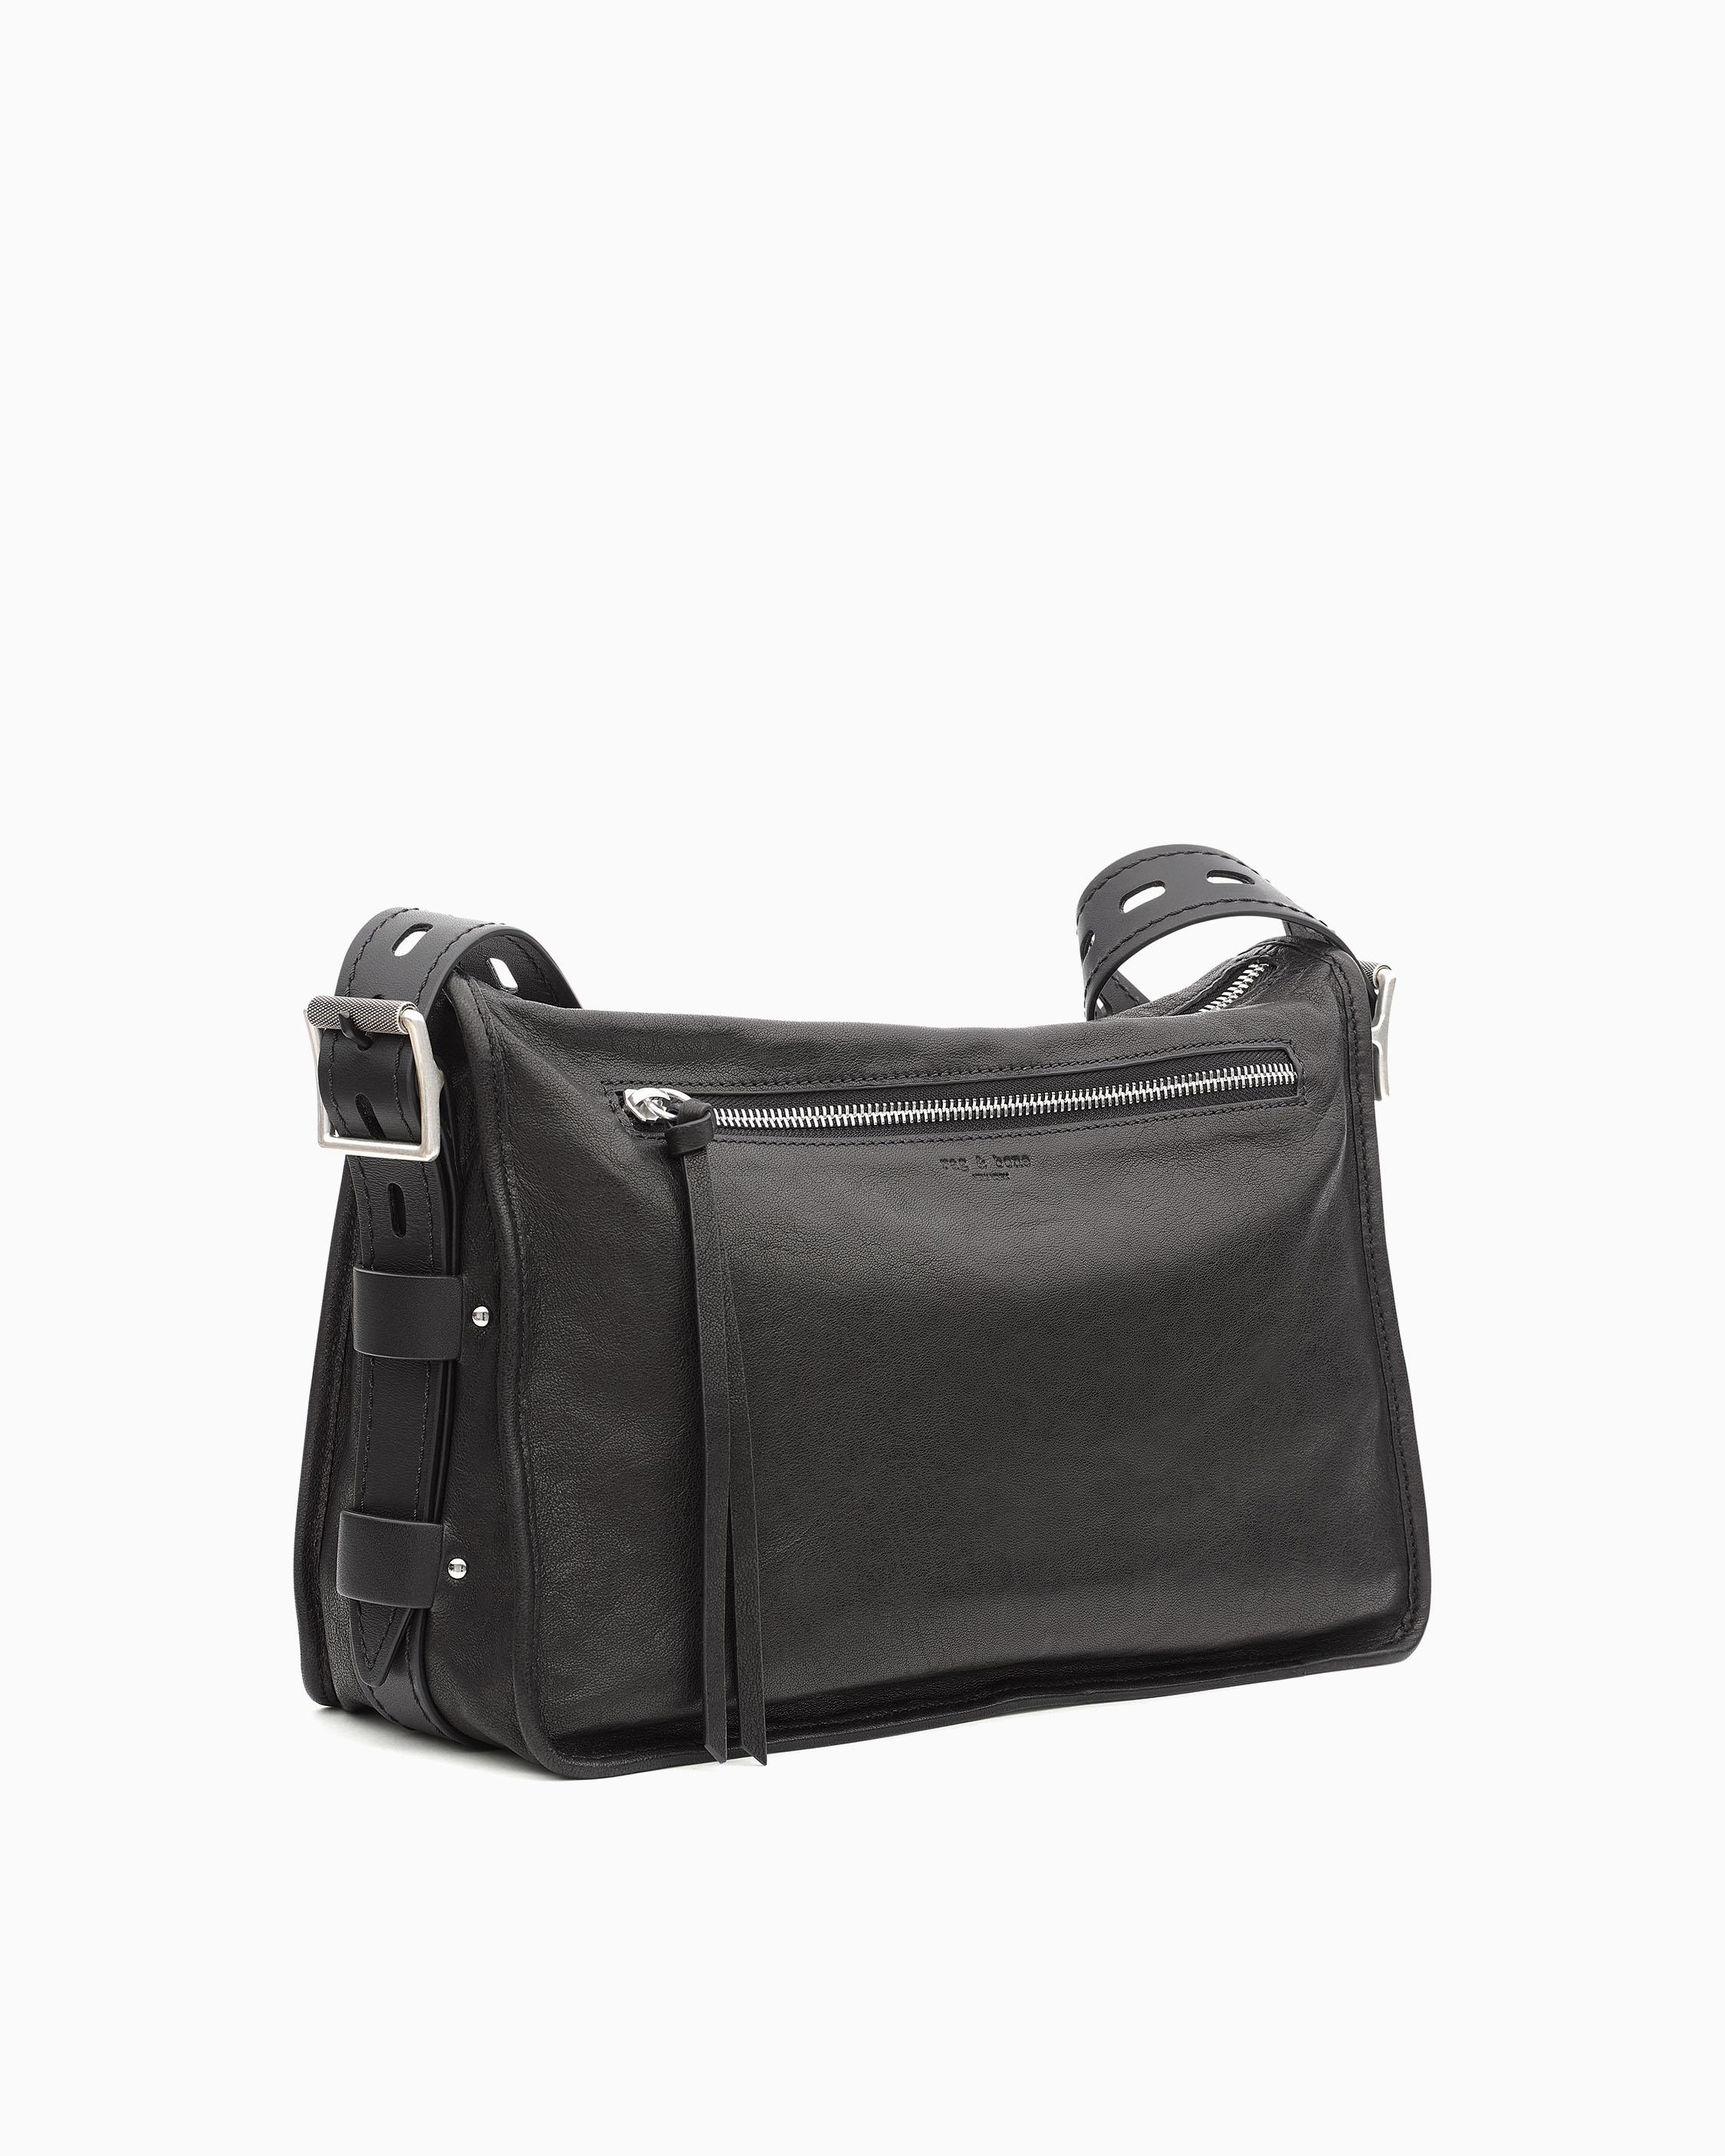 5 Patent Free Leather Messenger Bags! — High On Leather